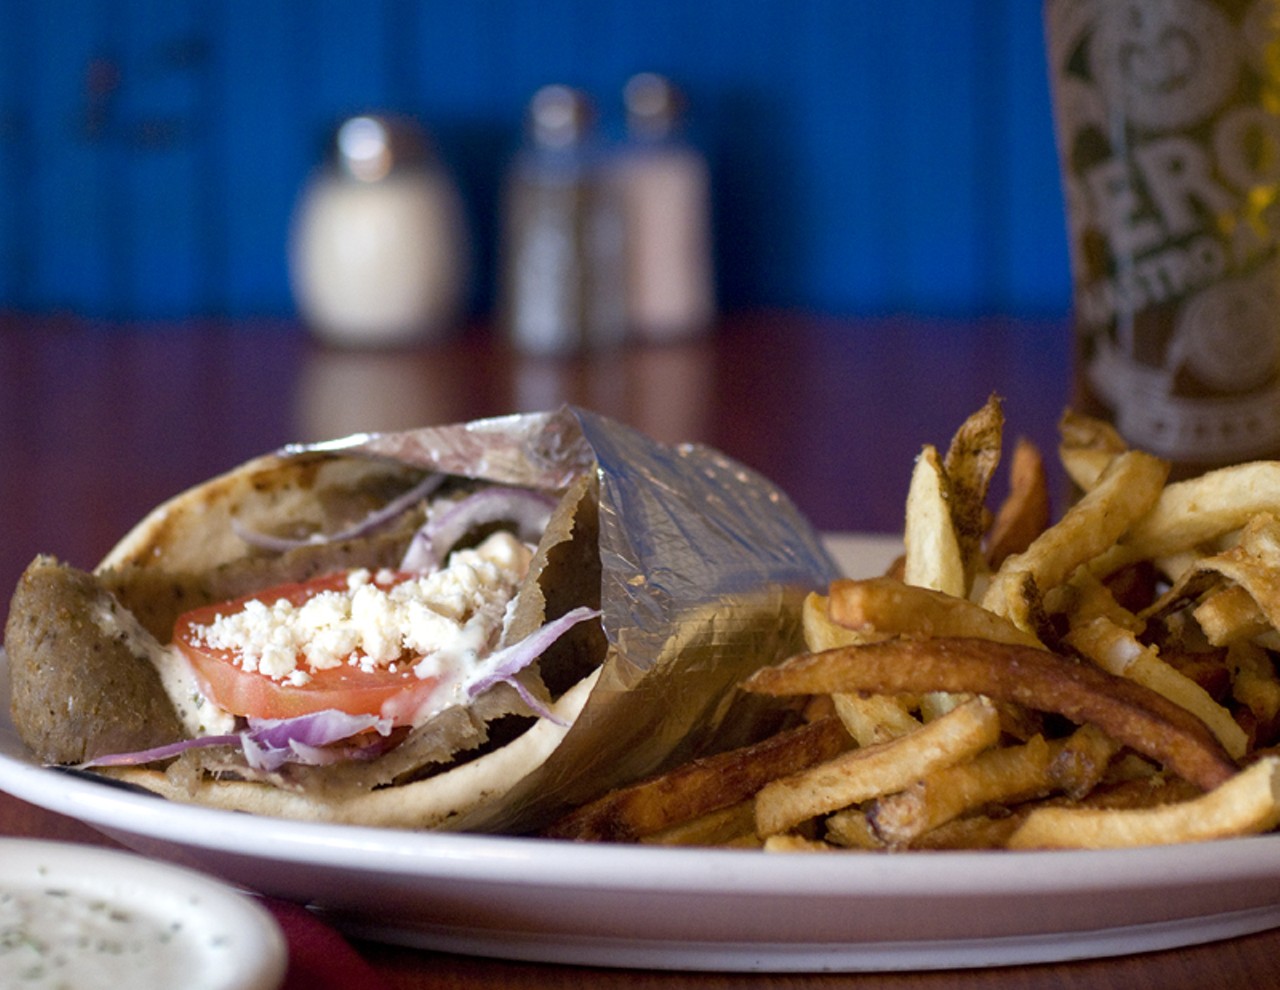 The gyro sandwich with French fries and a Peroni beer. Oh, and we'd like a little extra tzatziki on the side.